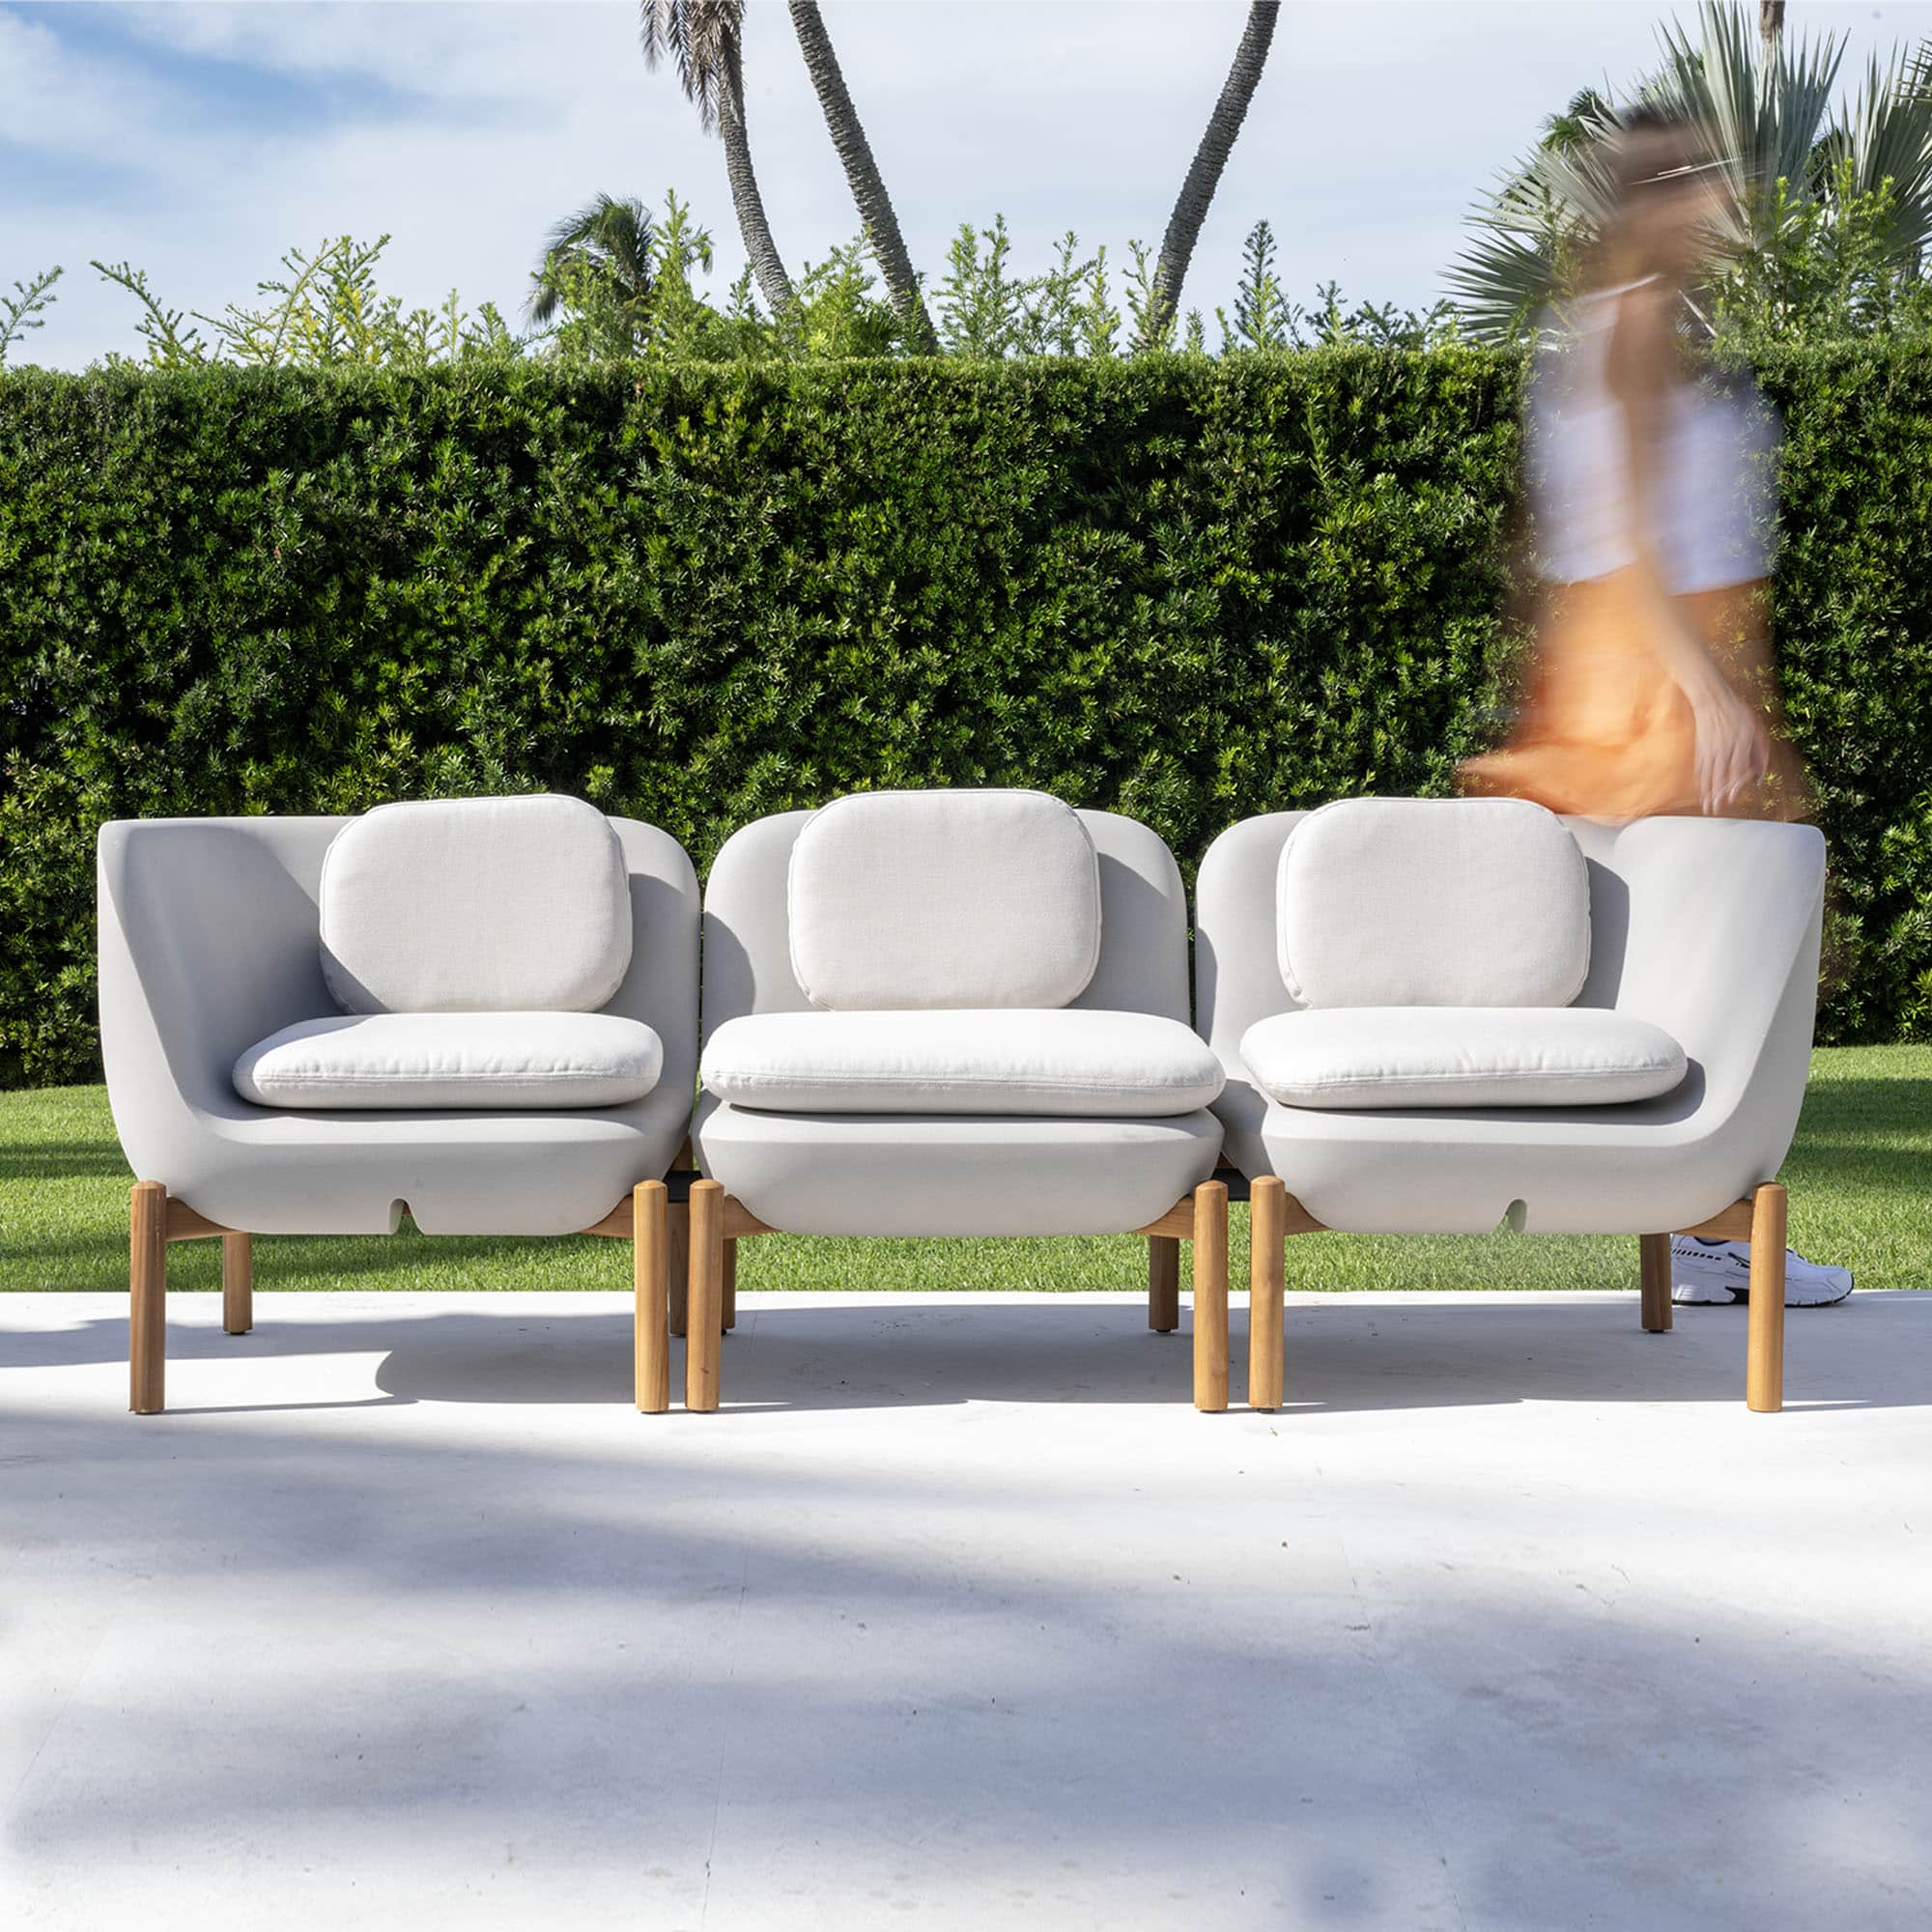 Inou Elements 3-seater sofa in Parchment with Teak Legs